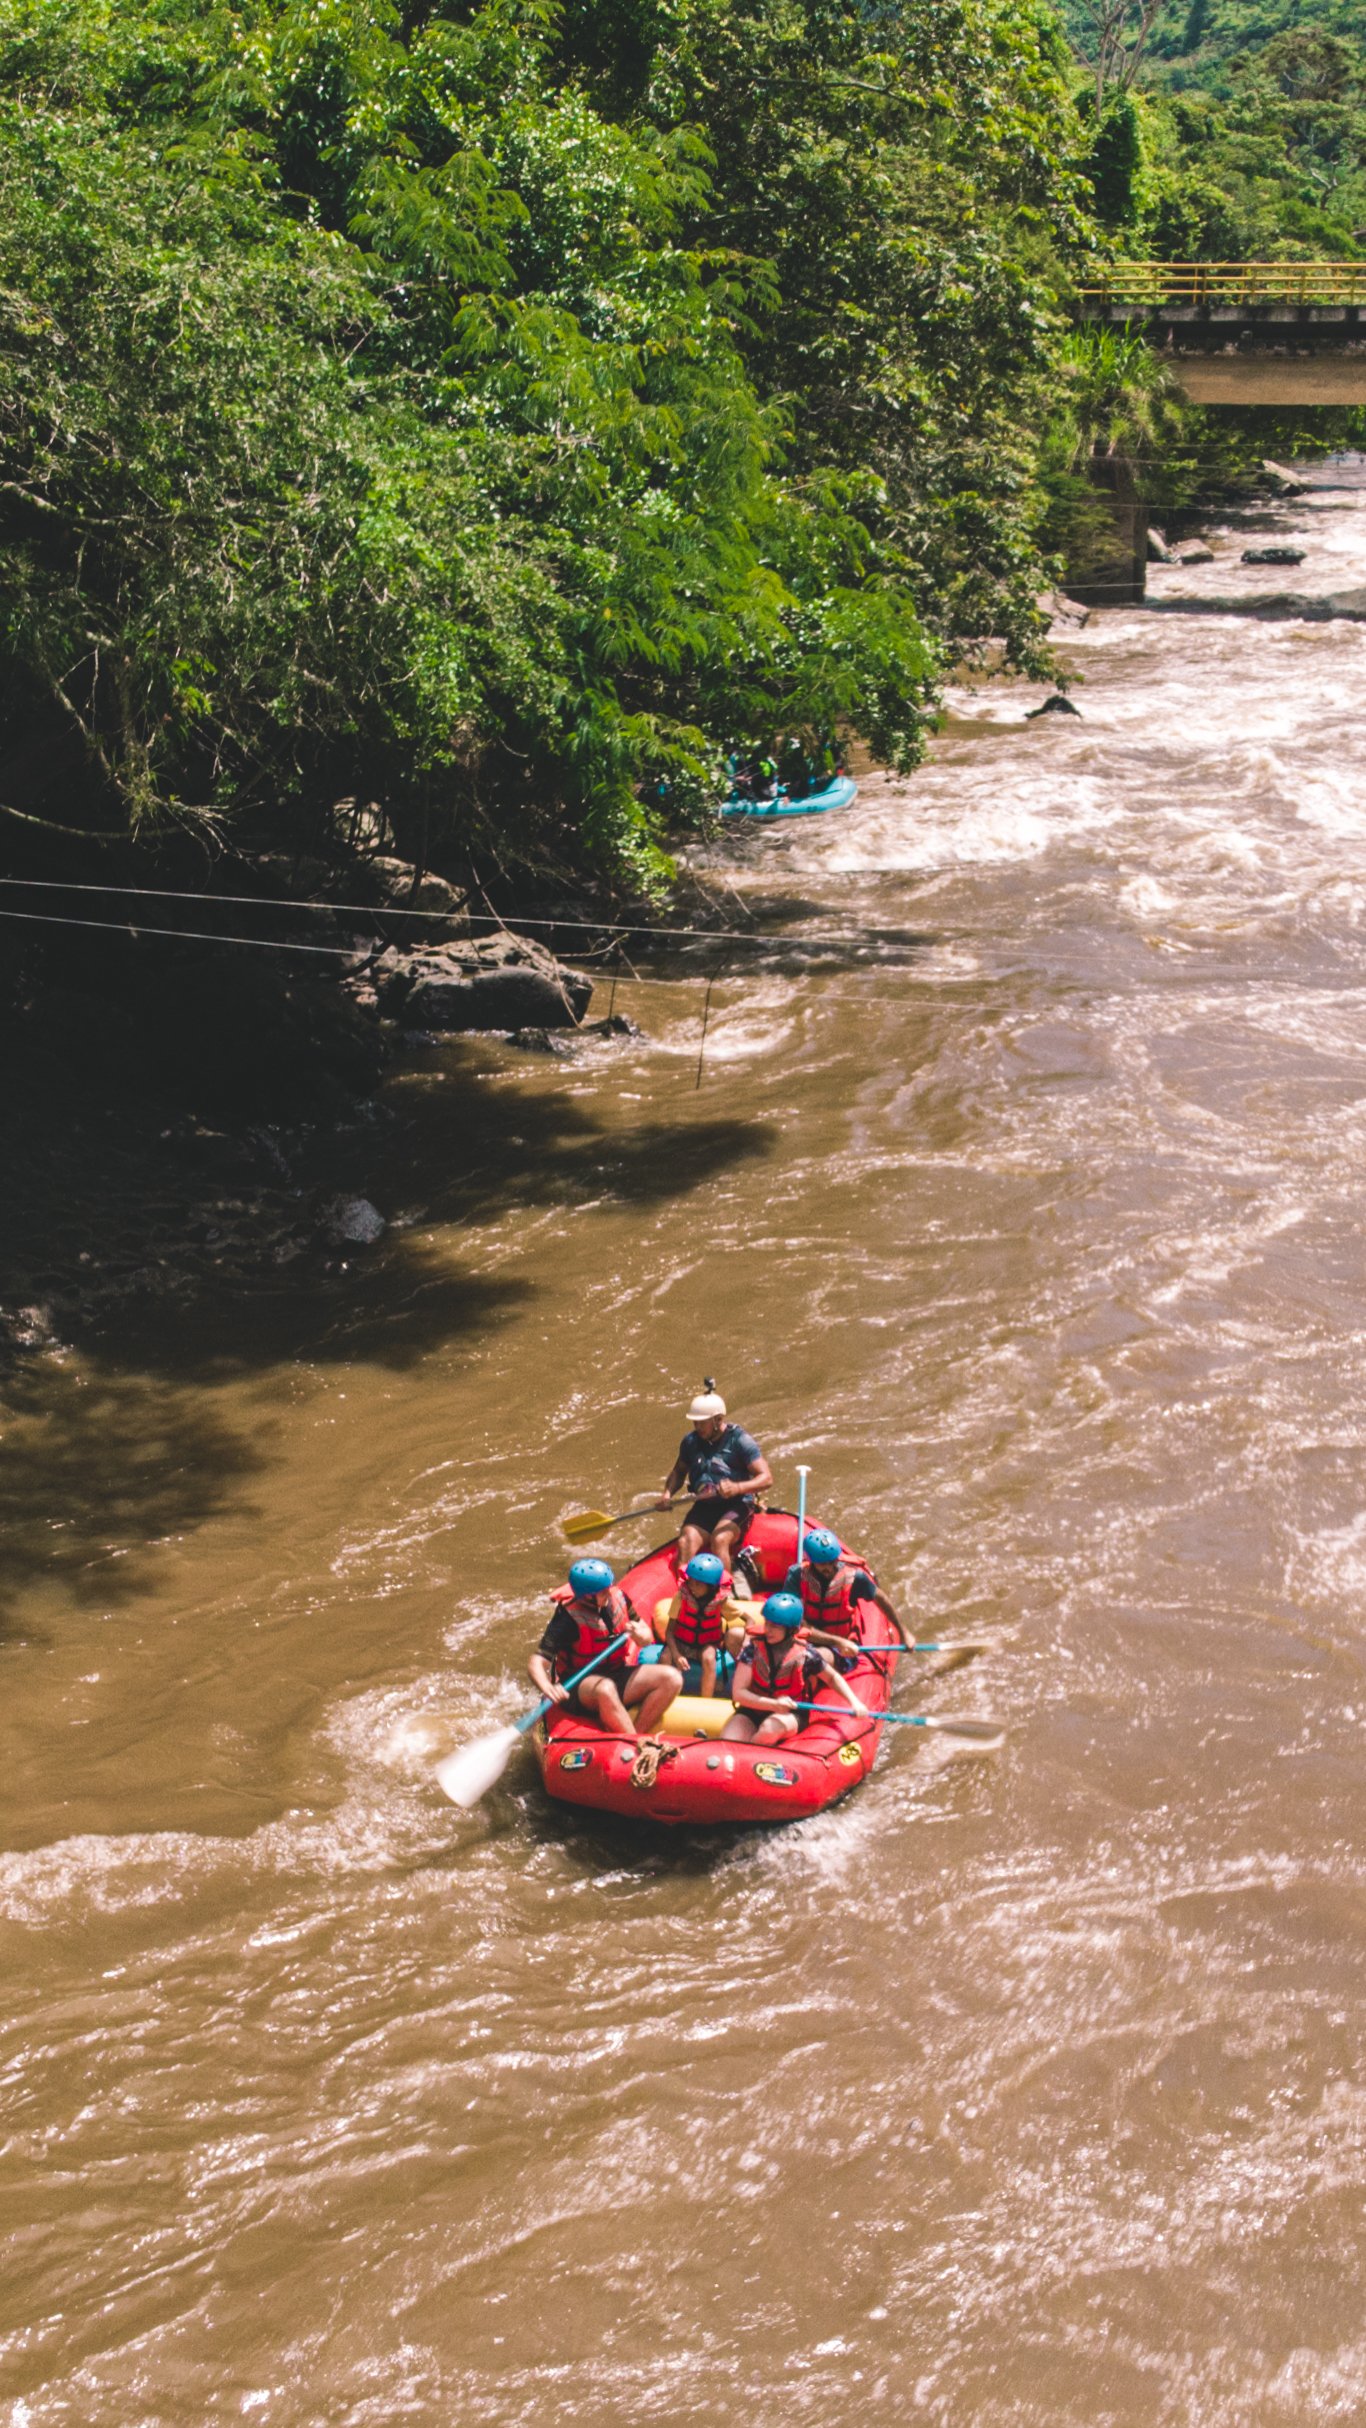 Rafting in San Gil,booking activities to din San Gil, things to do in san gil colombia, what to do in san gil, san gil colombia, adventure in san gil, prices activities in san gil, Macondo Hostel, Macondo Hostel in San Gil, where to stay in San Gil, San Gil hostel, 